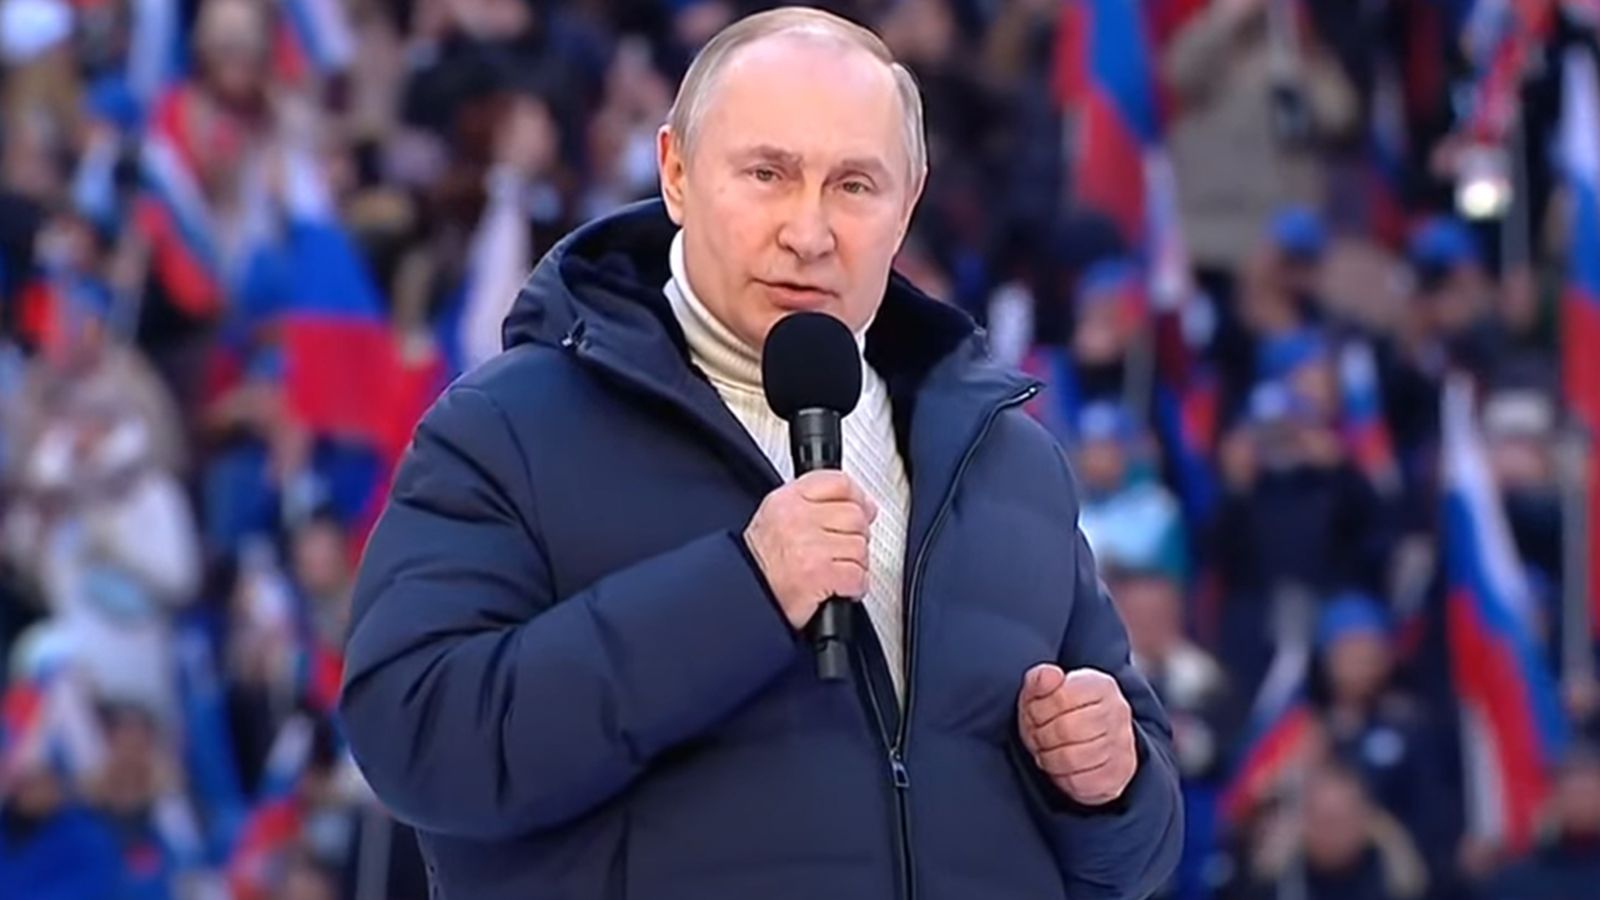 Putin speaks at live music concert in Moscow to celebrate anniversary ...